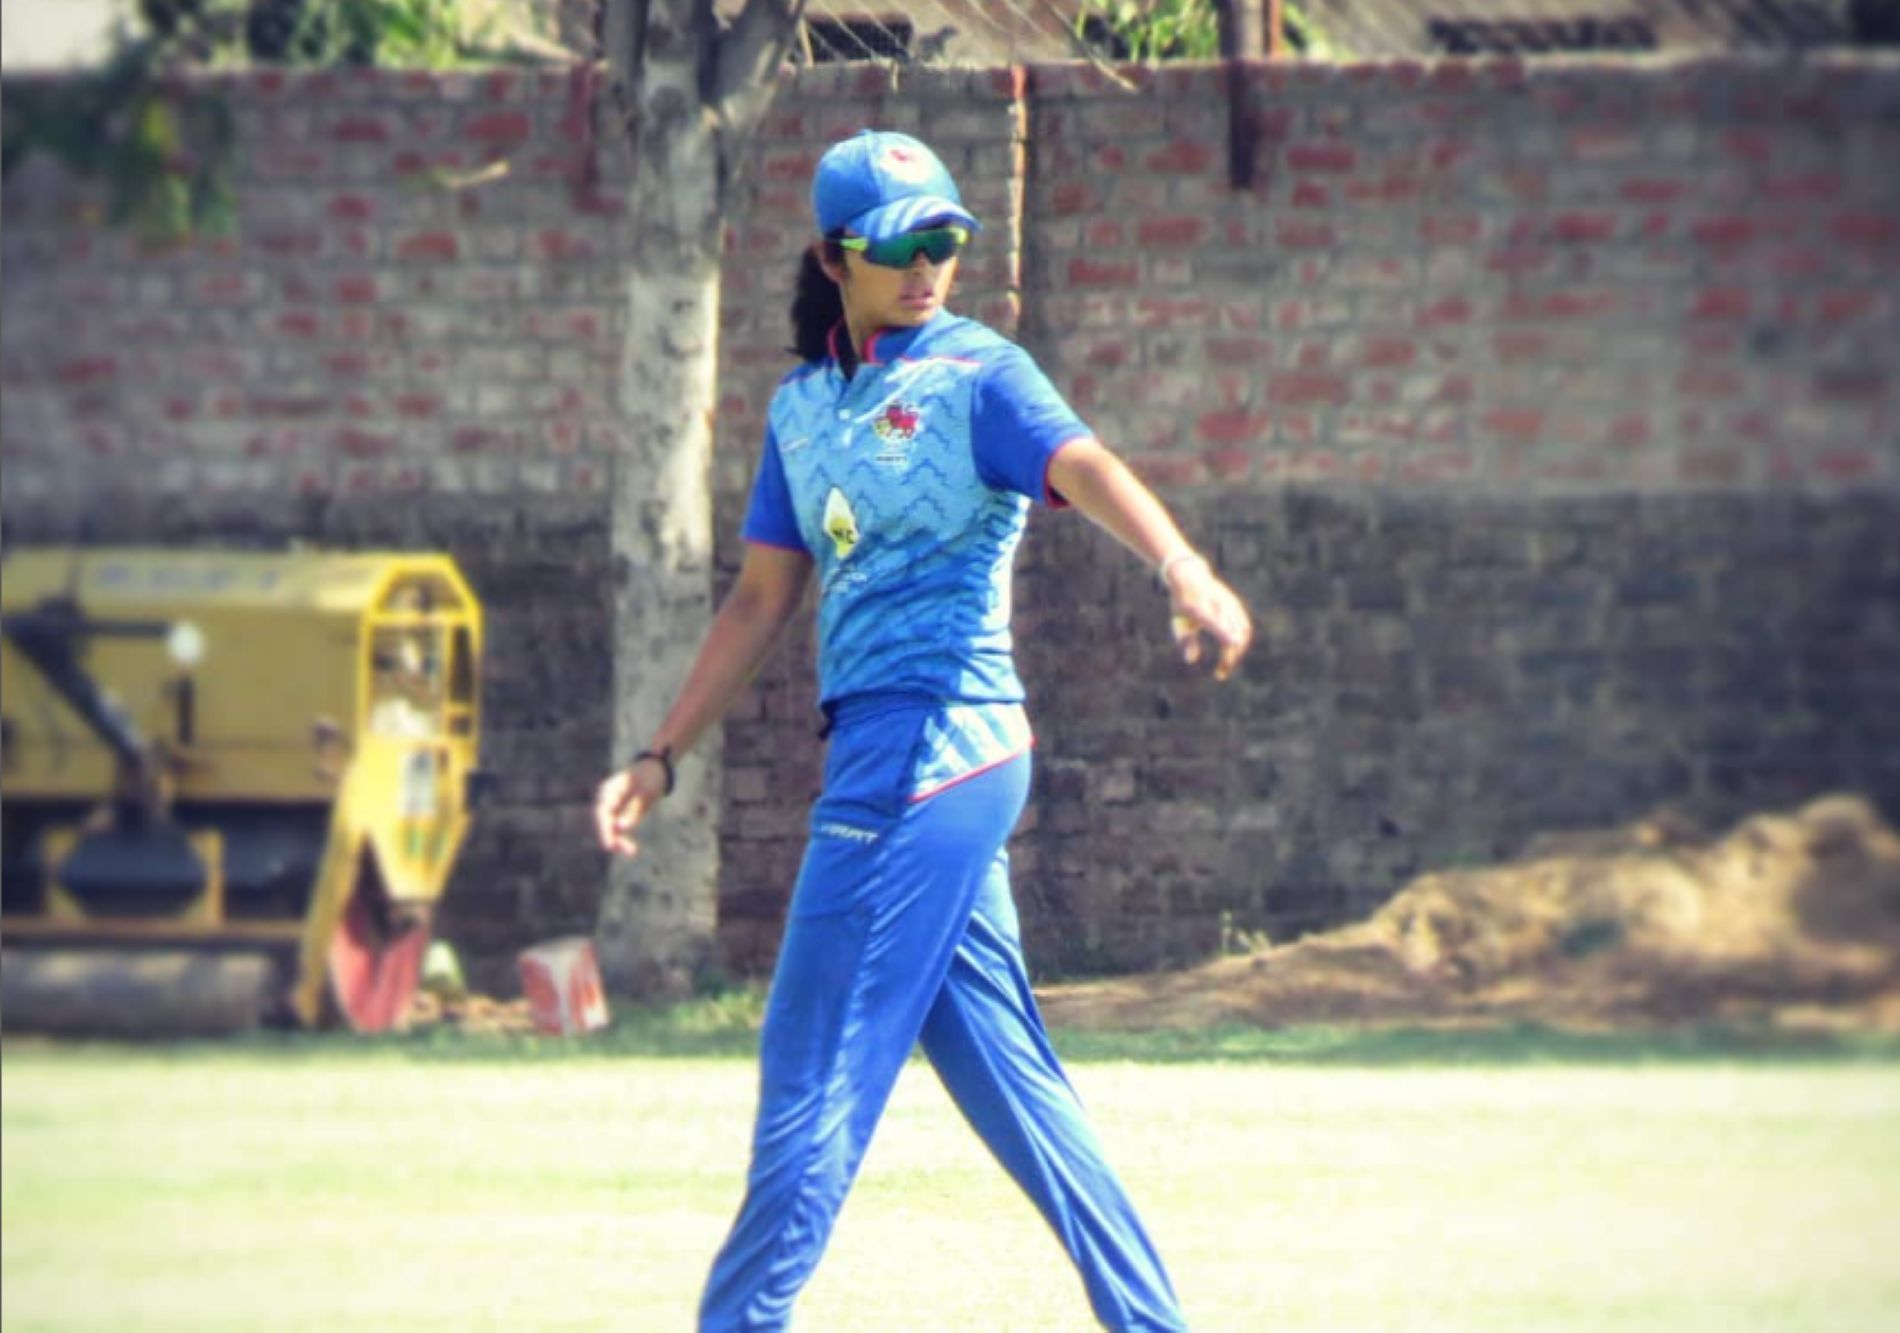 Sayali Satghare will feature in the WPL for the first time